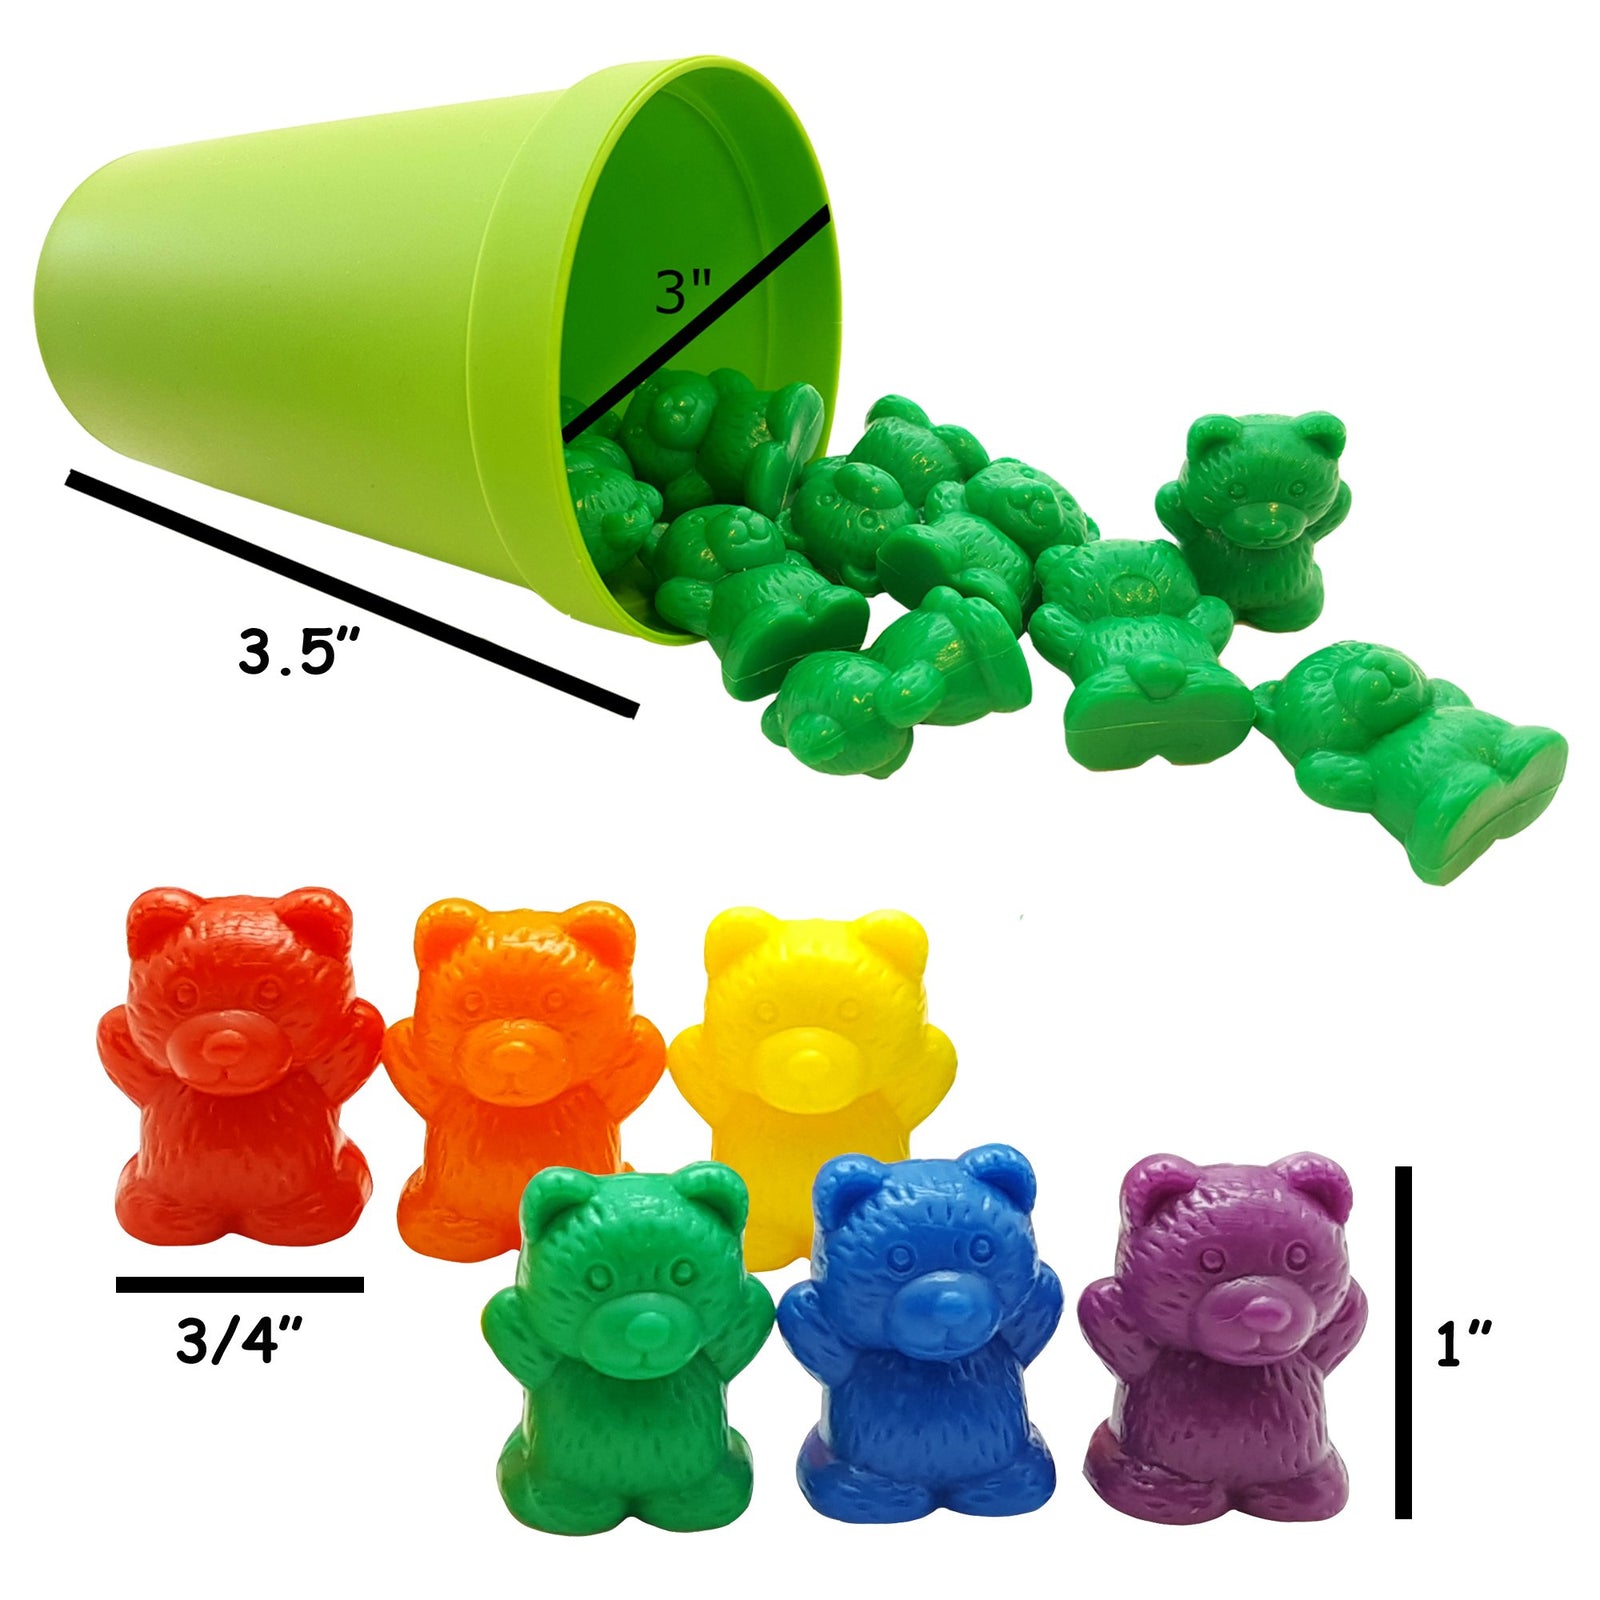 Skoolzy Rainbow Counting Bears with Matching Sorting Cups, Bear Counters and Dice Math Toddler Games 71pc Set - Bonus Scoop Tongs, Storage Bags